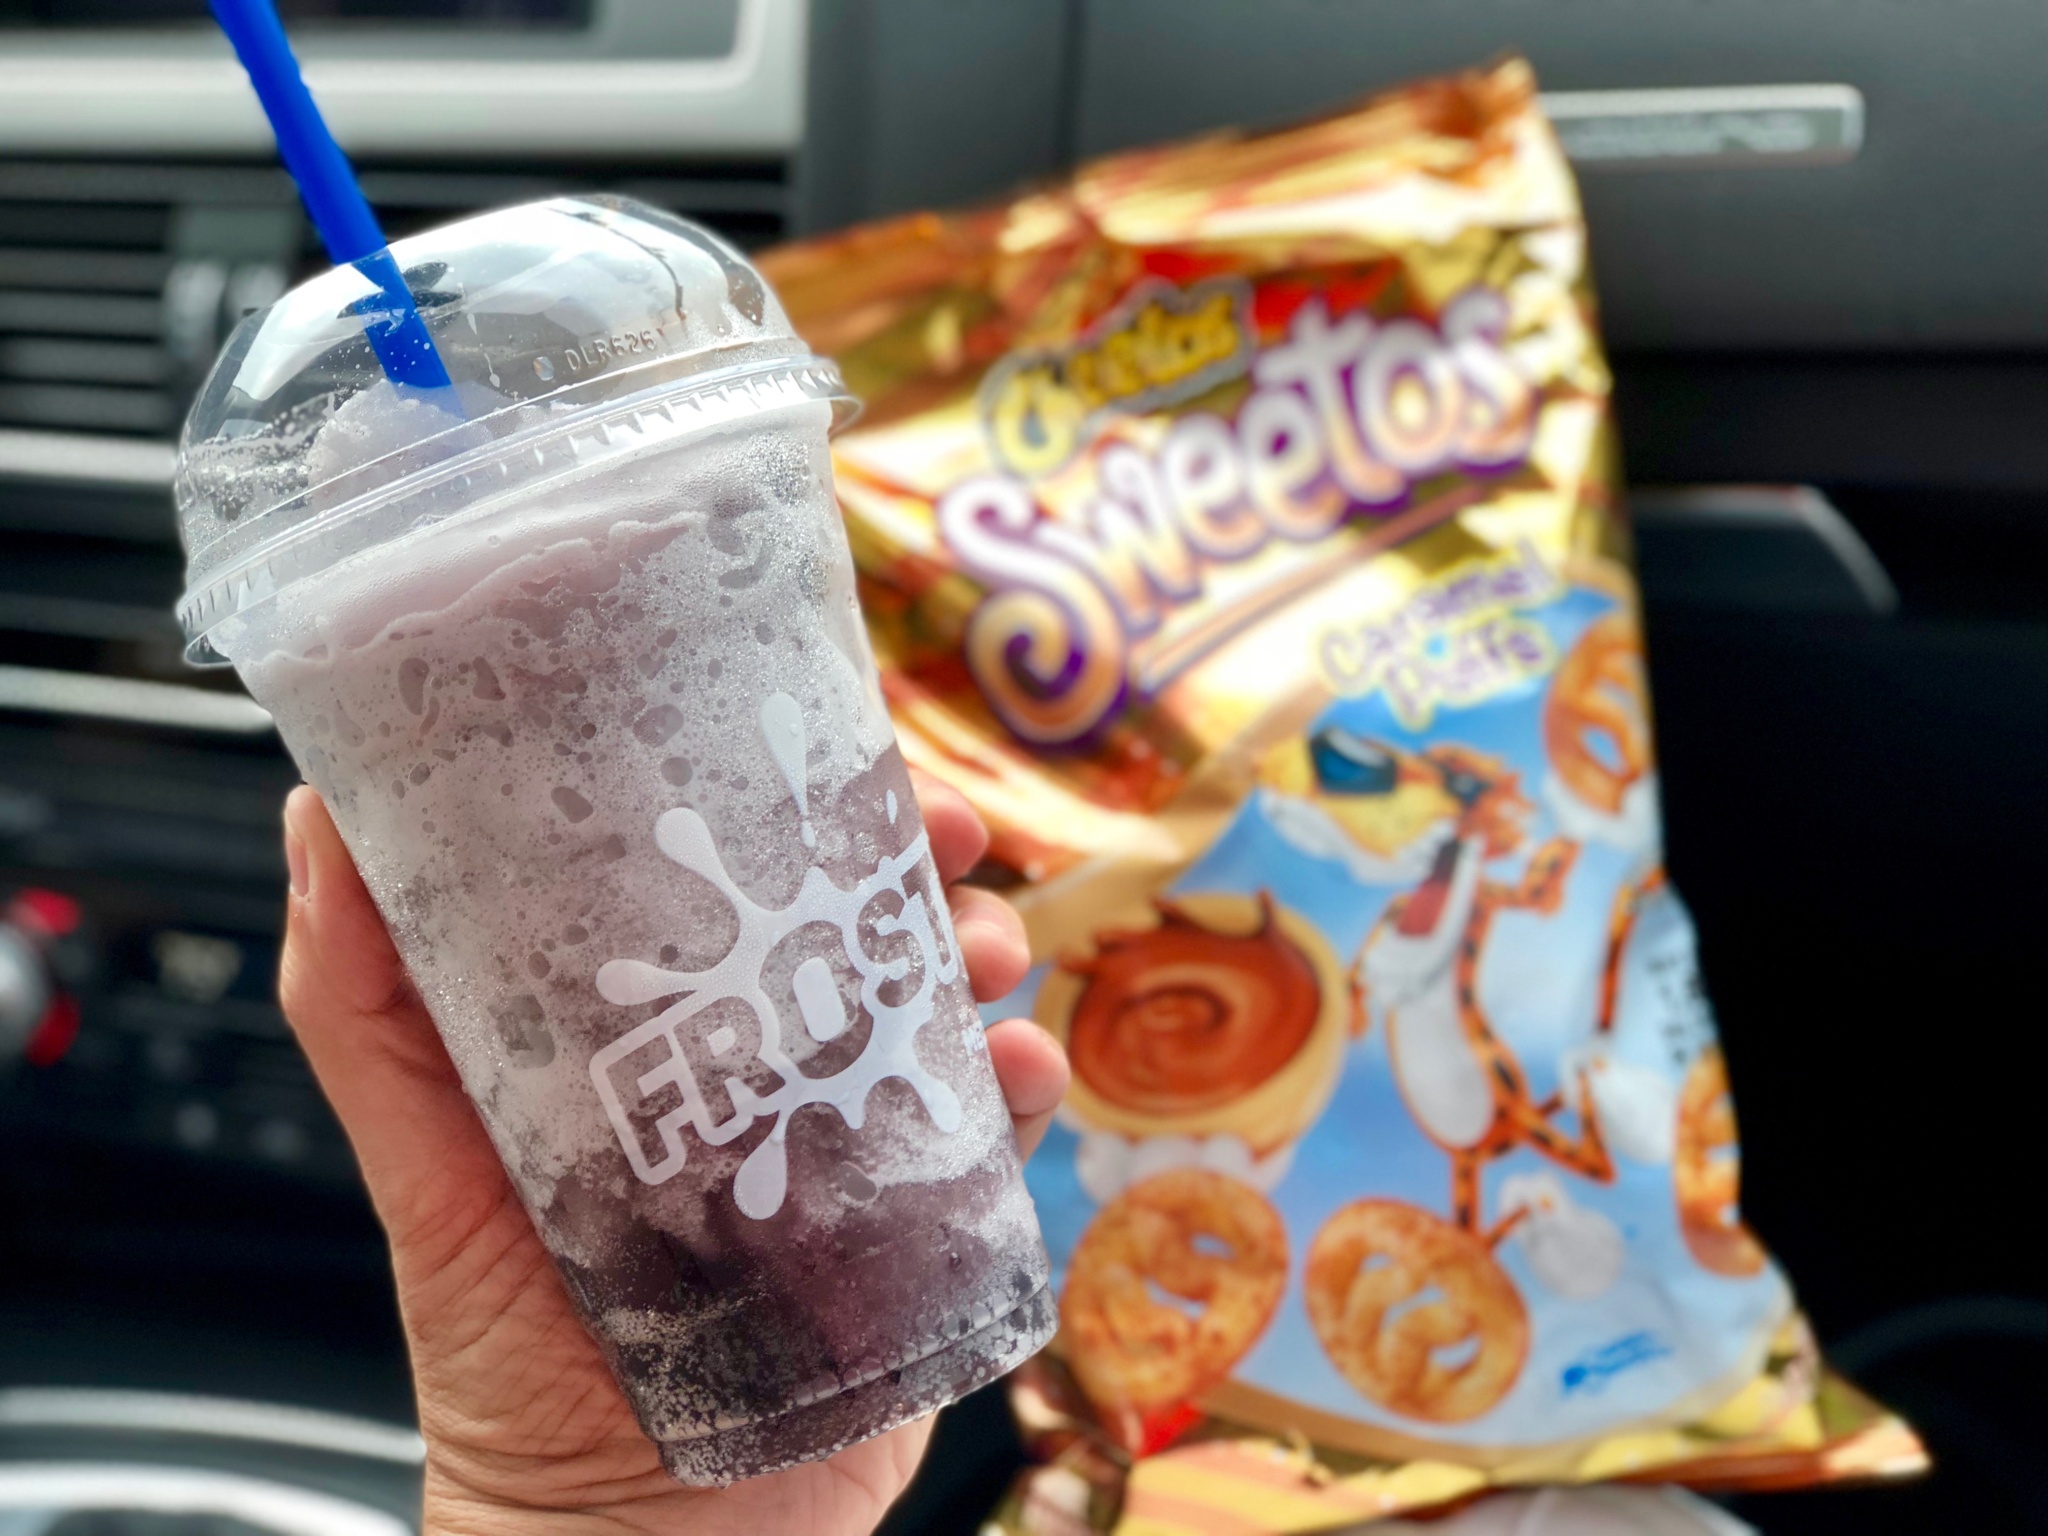 Cheetos Sweetos and Froster